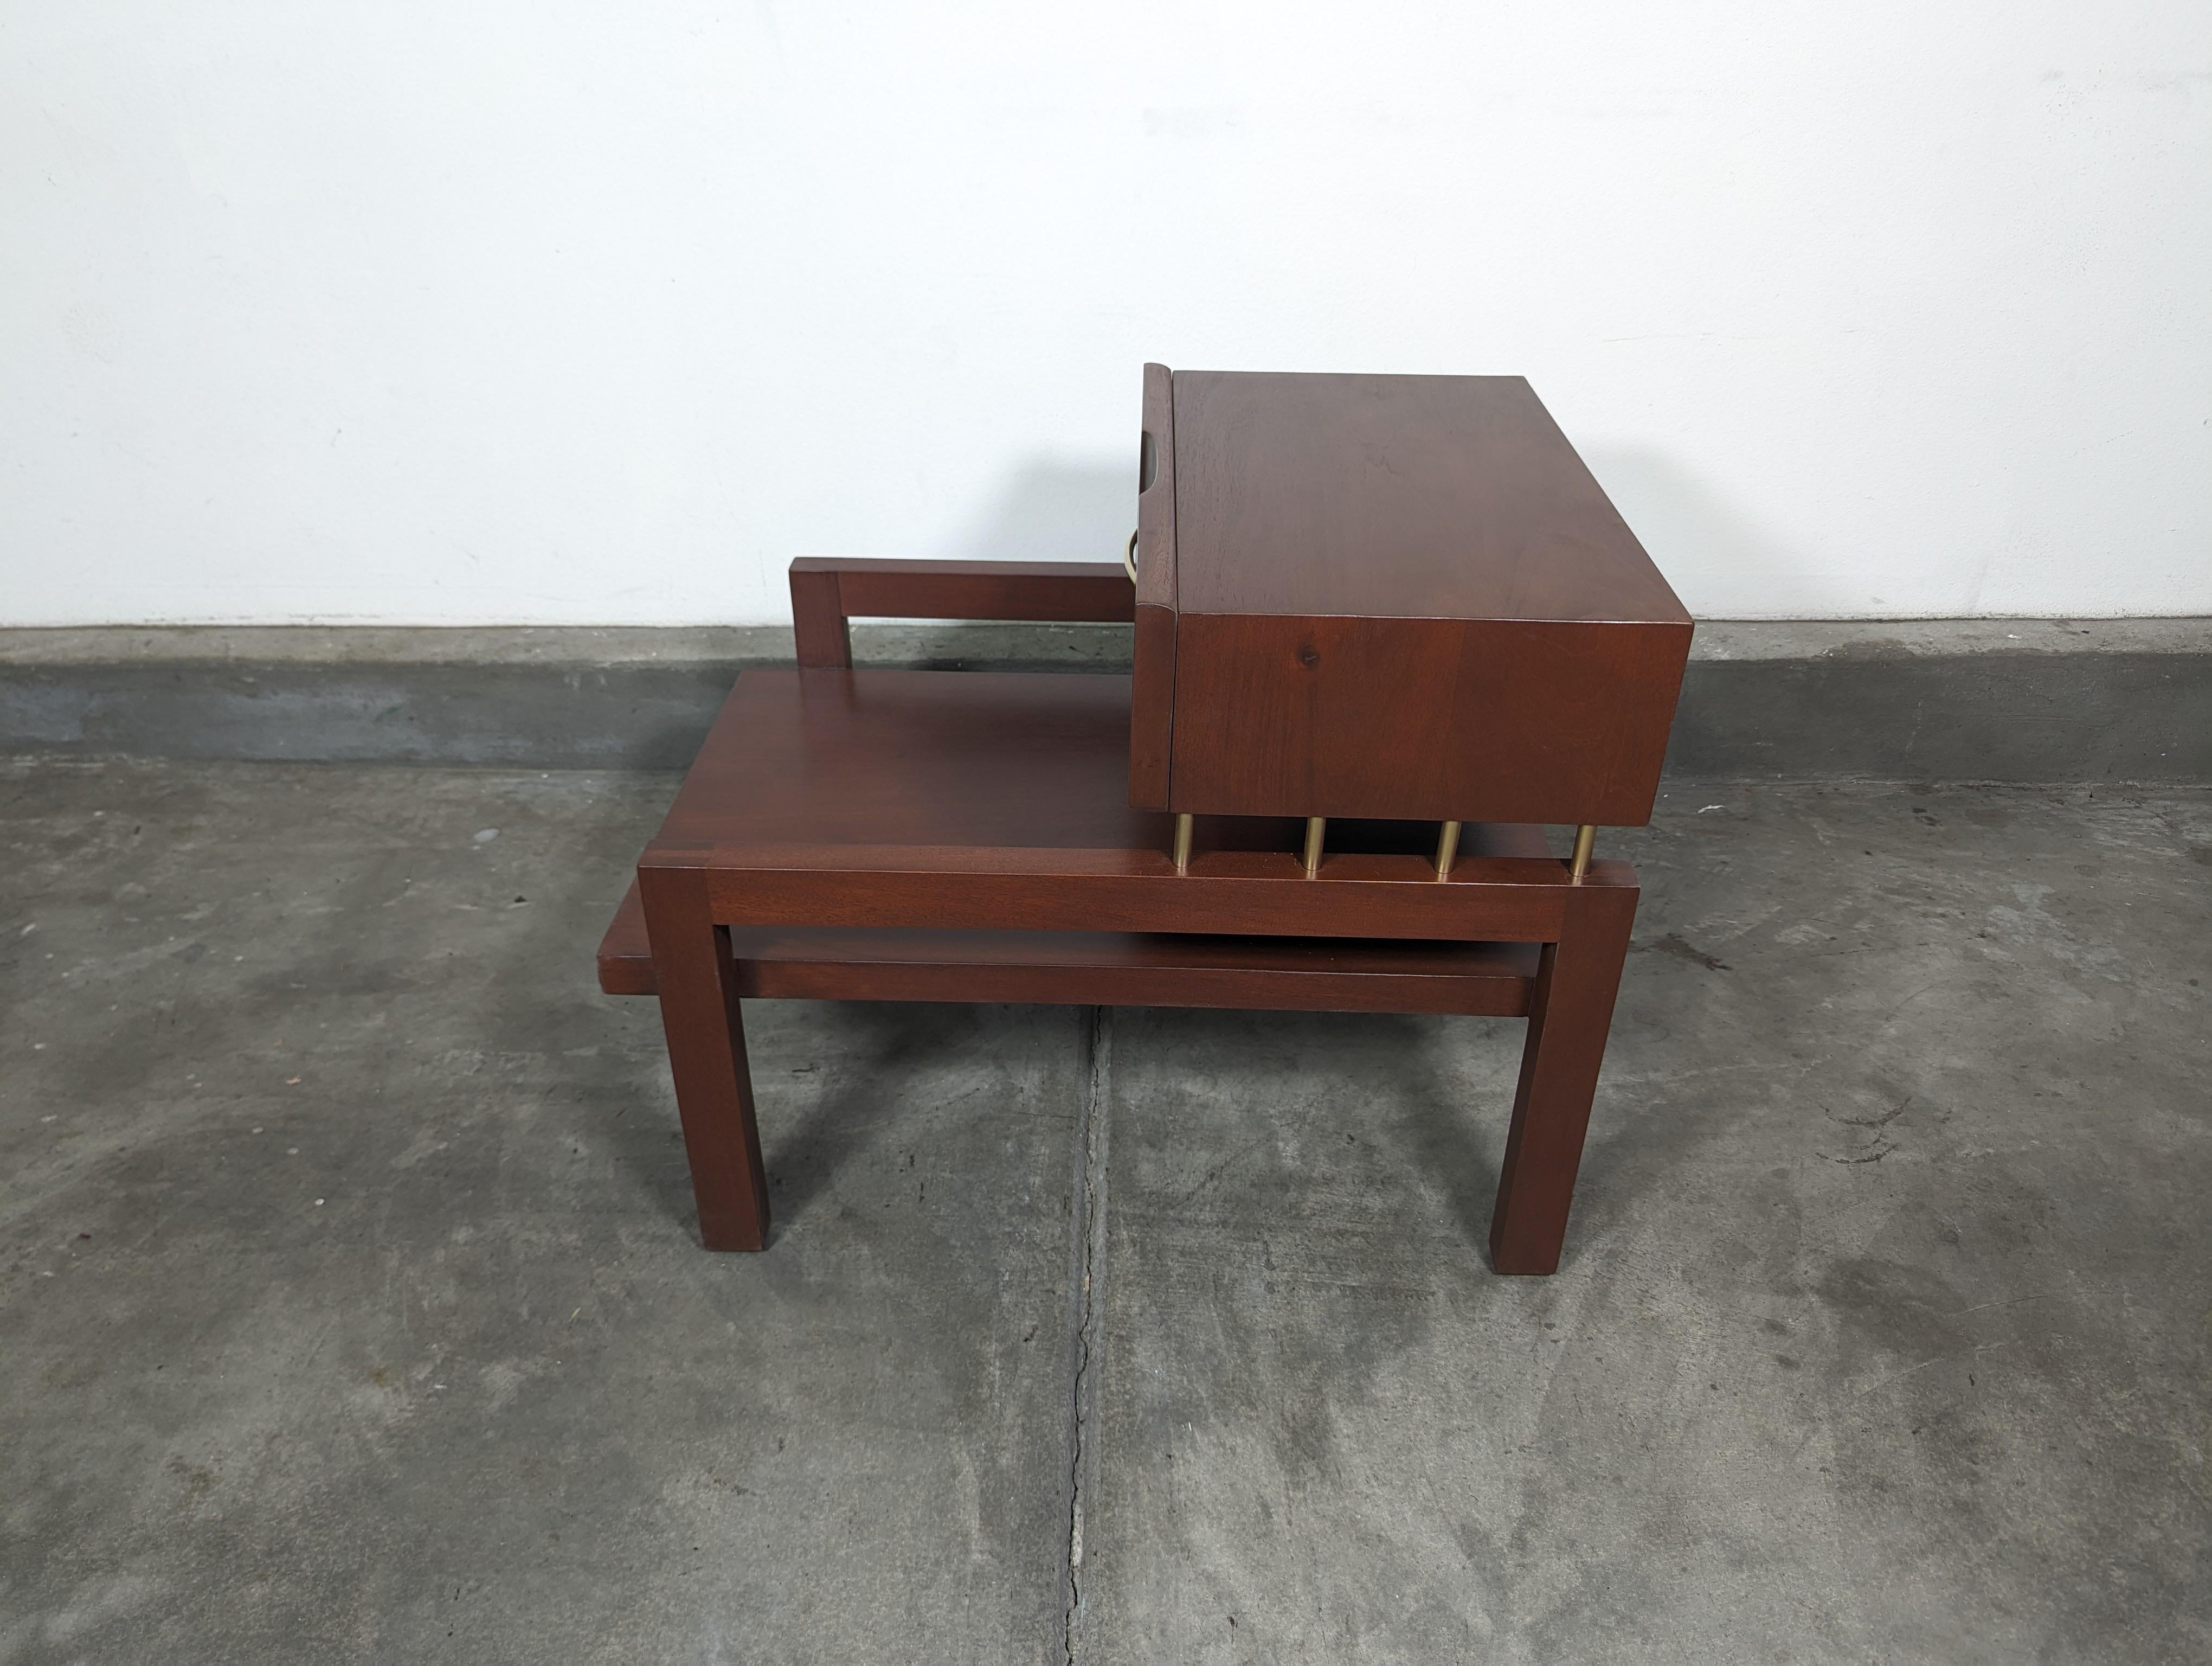 Mid Century Modern End Table by Edmond J. Spence for Industria Mueblera, c1950s For Sale 3